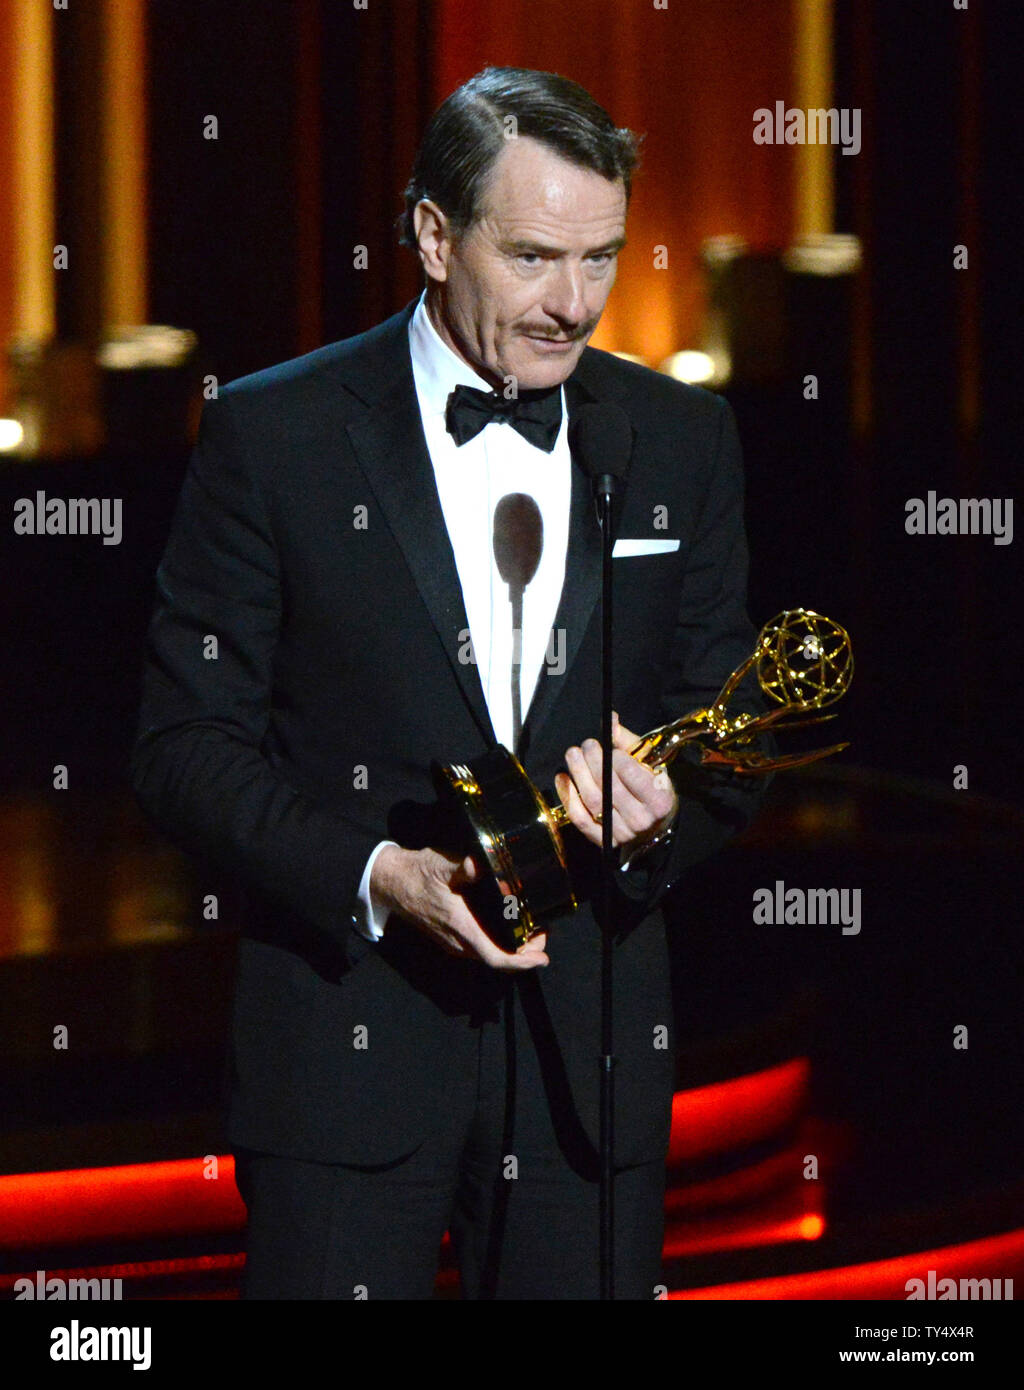 Bryan Cranston accepts the award for outstanding lead actor in a drama series for his work in 'Breaking Bad' during the Primetime Emmy Awards at the Nokia Theatre in Los Angeles on August 25, 2014.     UPI/Pat Benic Stock Photo